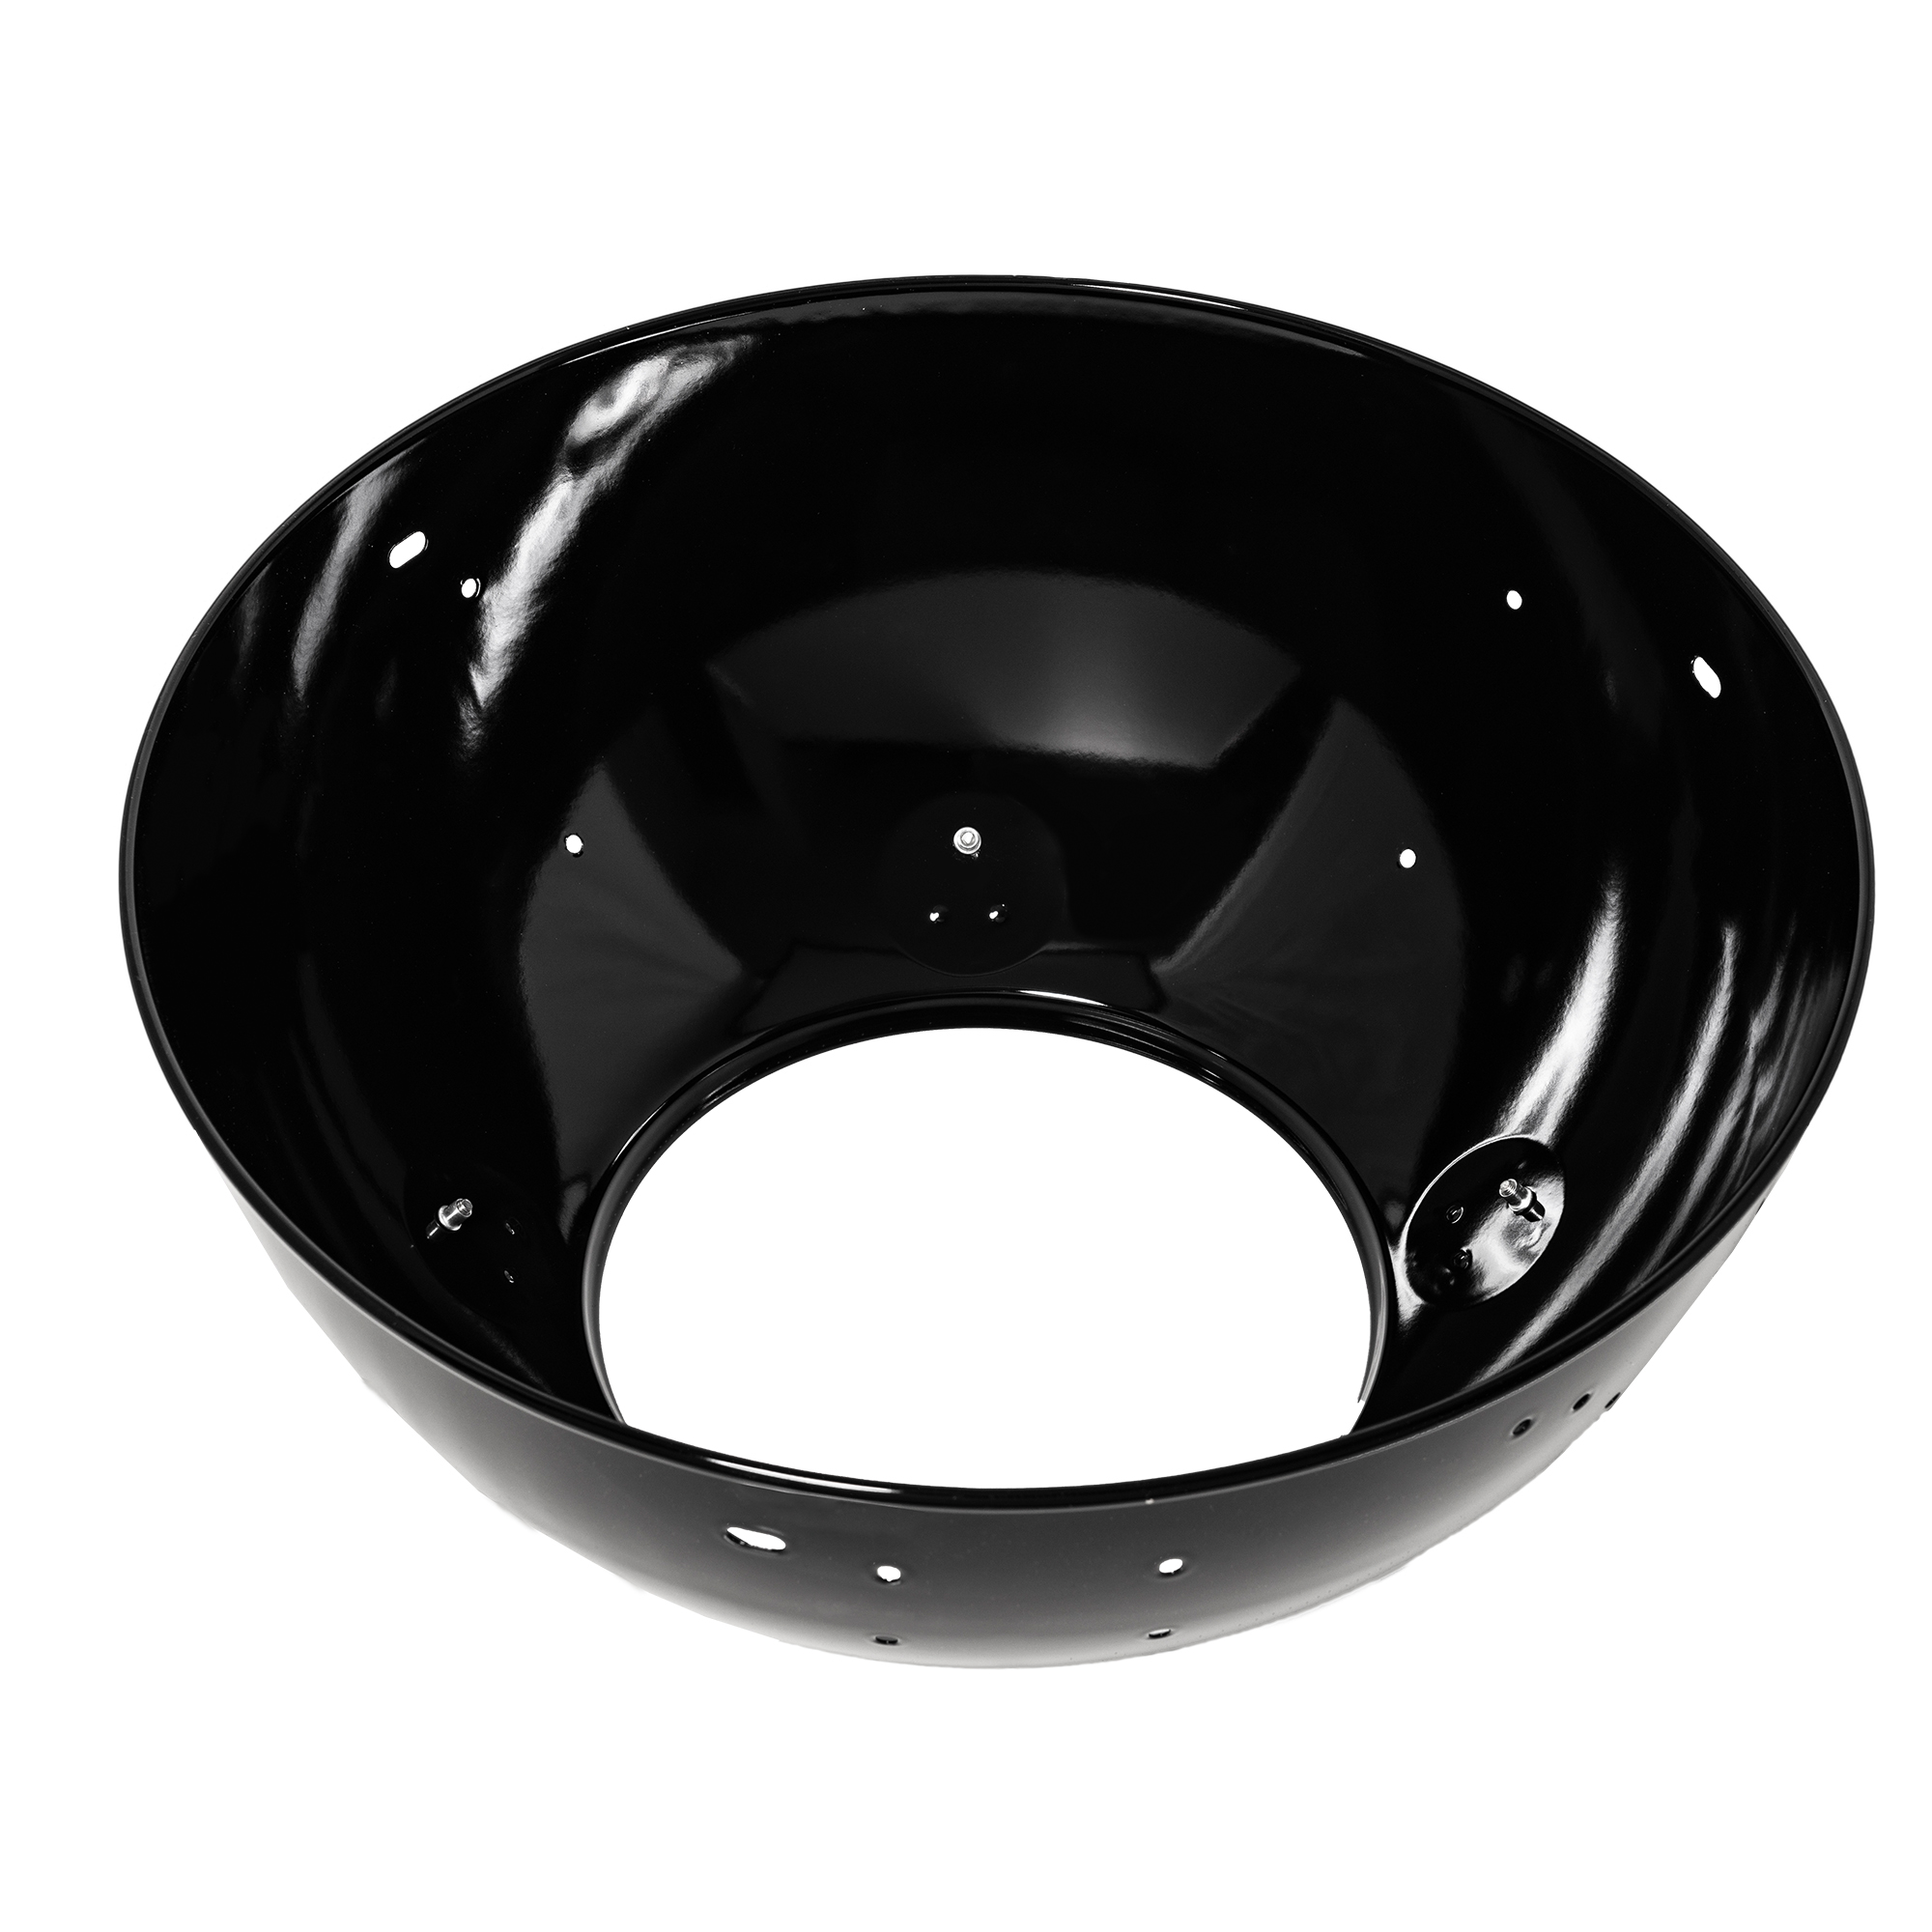 Firebowl AIR F60 w/o mounting parts